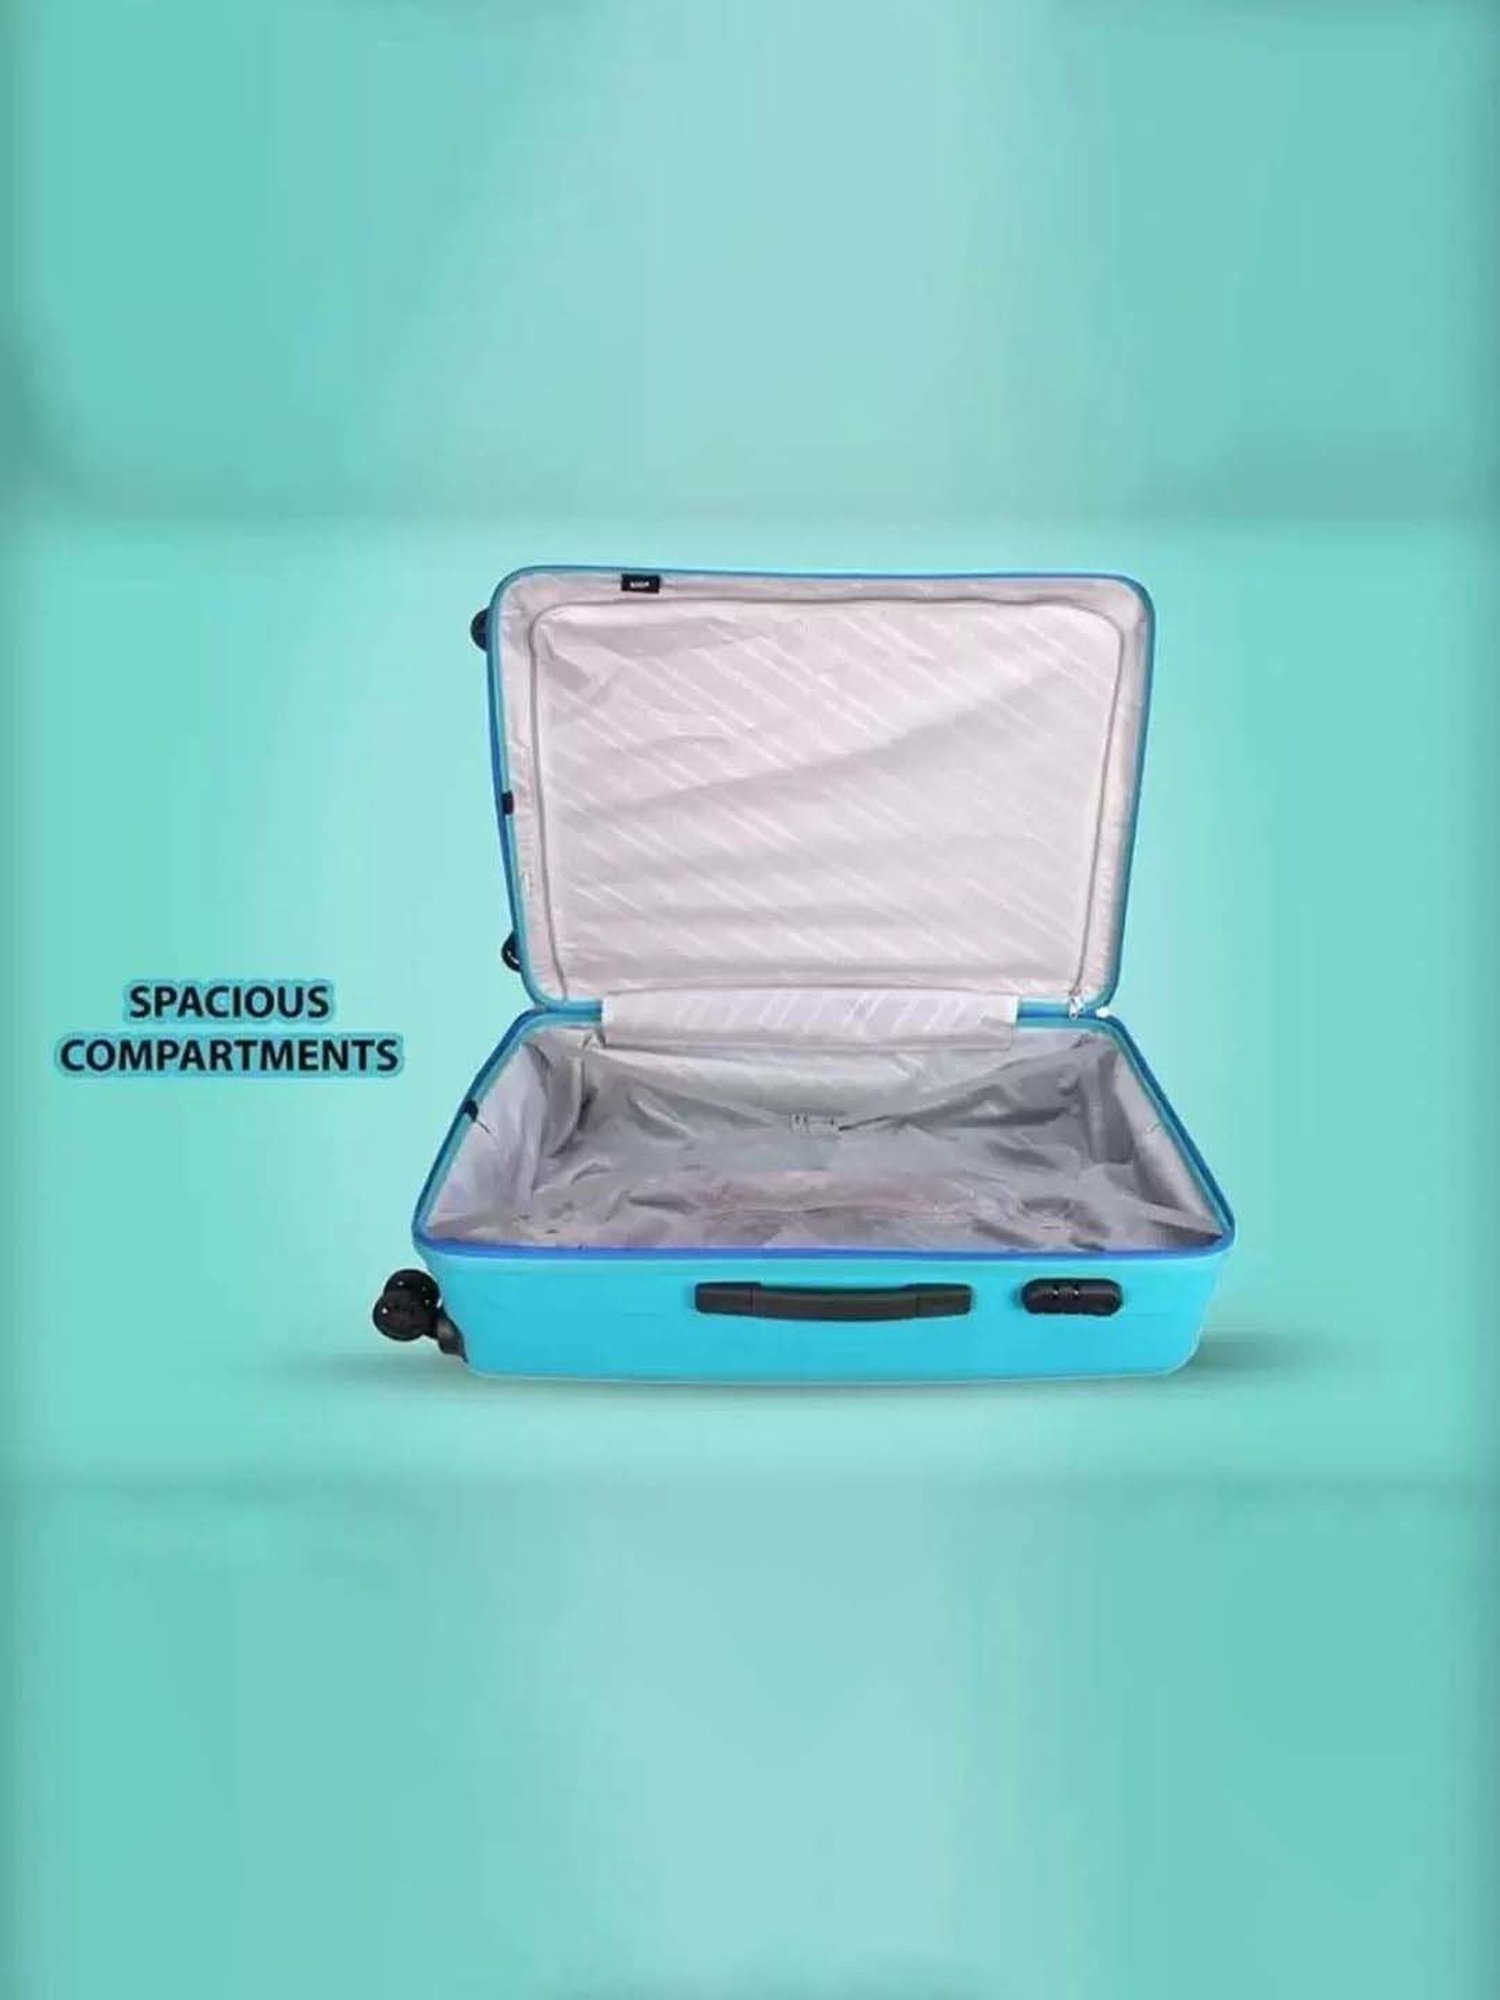 4 Wheel Blue VIP Manama Gold Polycarbonate Luggage Bags (Set of 3 PC),  Size: Cabin